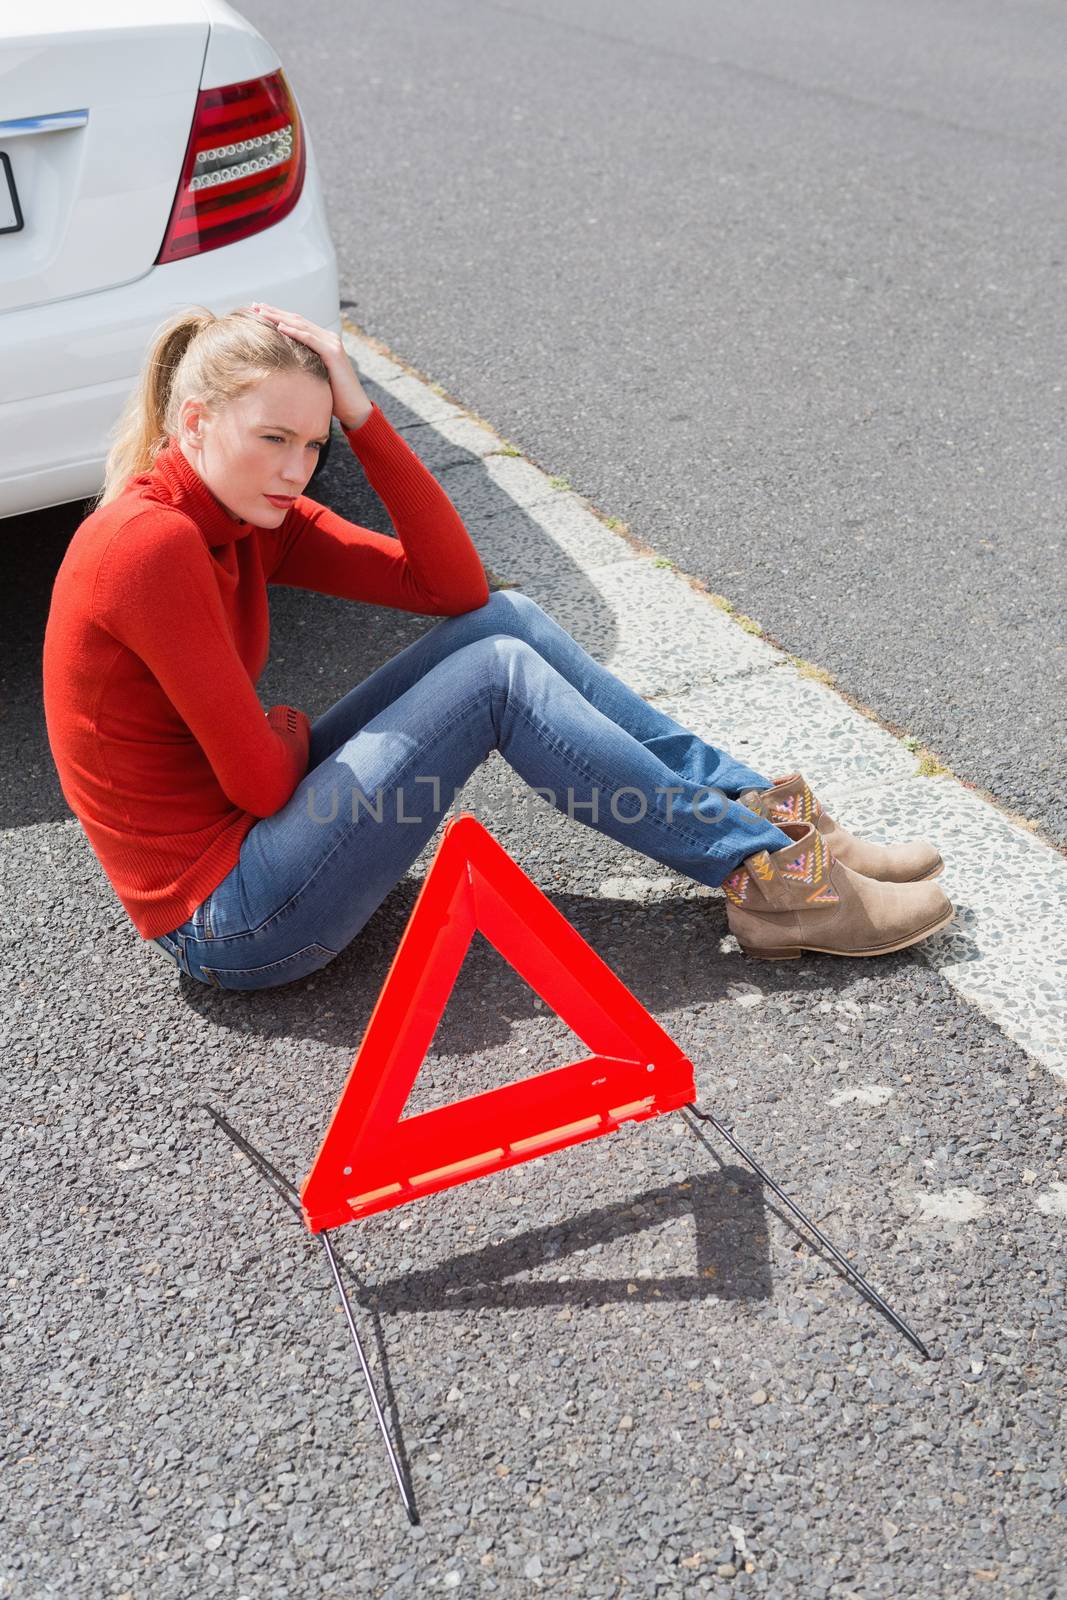 Triangle warning sign with broken down car 